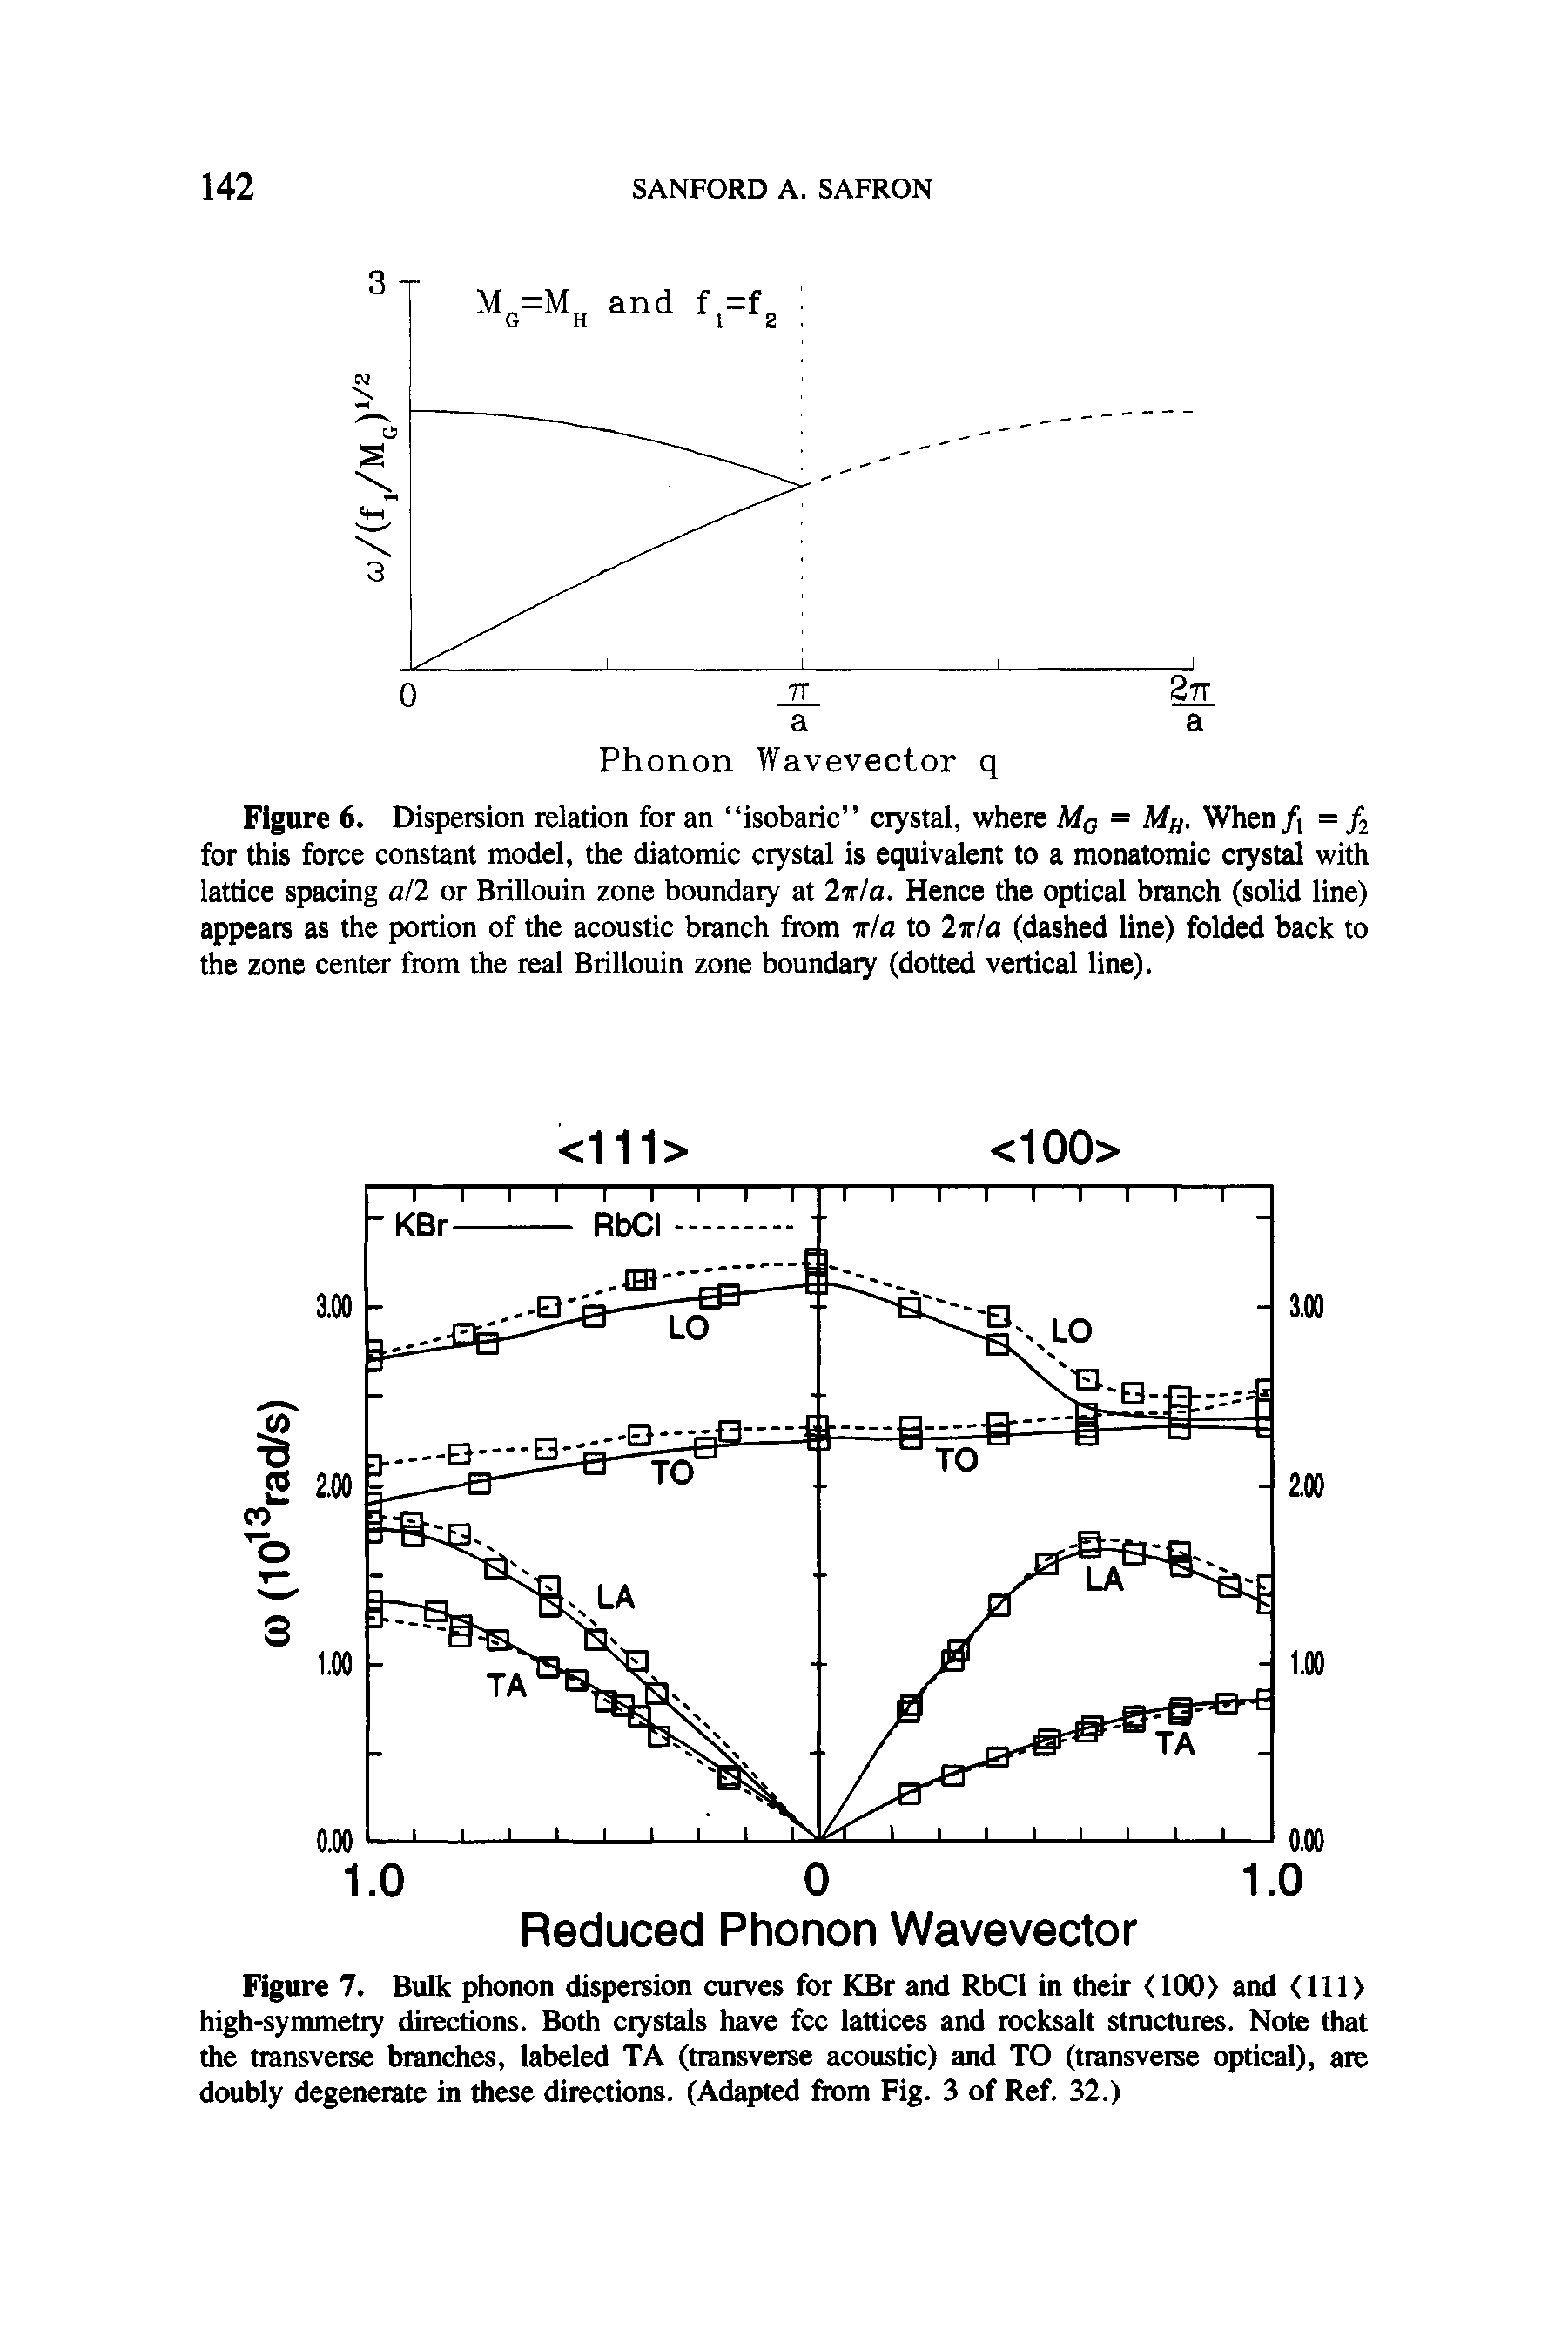 Figure 6. Dispersion relation for an isobaric crystal, where Mq = M. When /j = /2 for this force constant model, the diatomic crystal is equivalent to a monatomic crystal with lattice spacing a 2 or Brillouin zone boundary at 2ir/a. Hence the optical branch (solid line) appears as the portion of the acoustic branch from via to 2ir/a (dashed line) folded back to the zone center from the real Brillouin zone boundary (dotted vertical line).